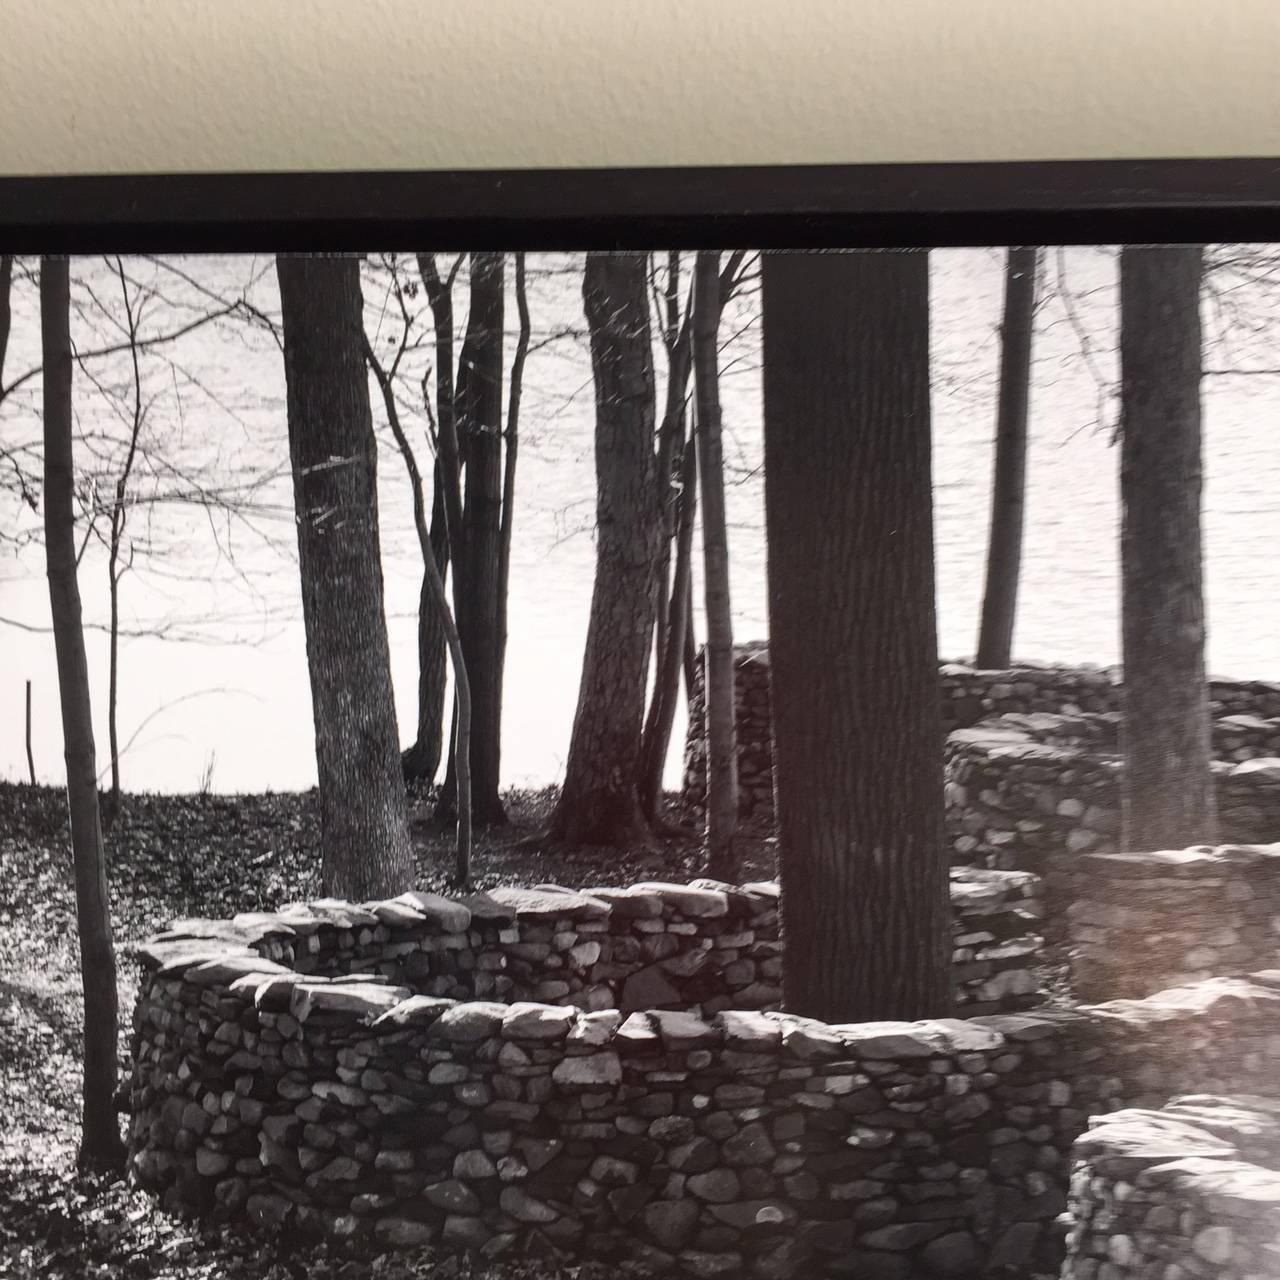 A truly stunning black and white photograph featuring Andy Goldsworthy wall from German photographer and visual artist Nina Dietzel, whose work oscillates between intense, fast-paced photojournalism to intimate, behind-the-scenes portraiture of some